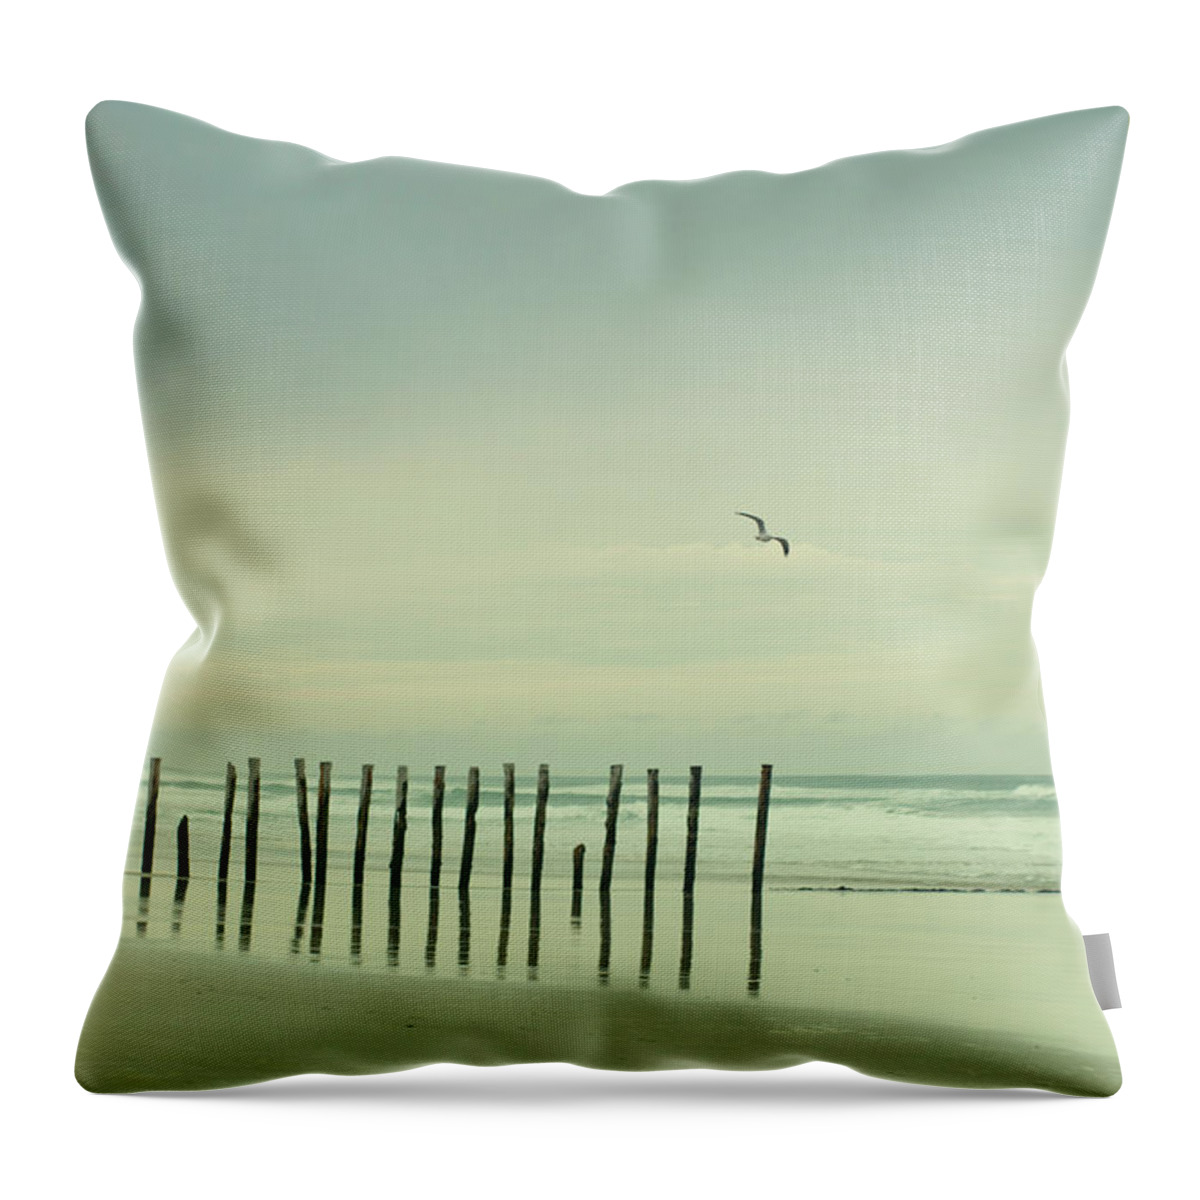 Wooden Post Throw Pillow featuring the photograph Wooden Pier Piles On Beach by Jill Ferry Photography